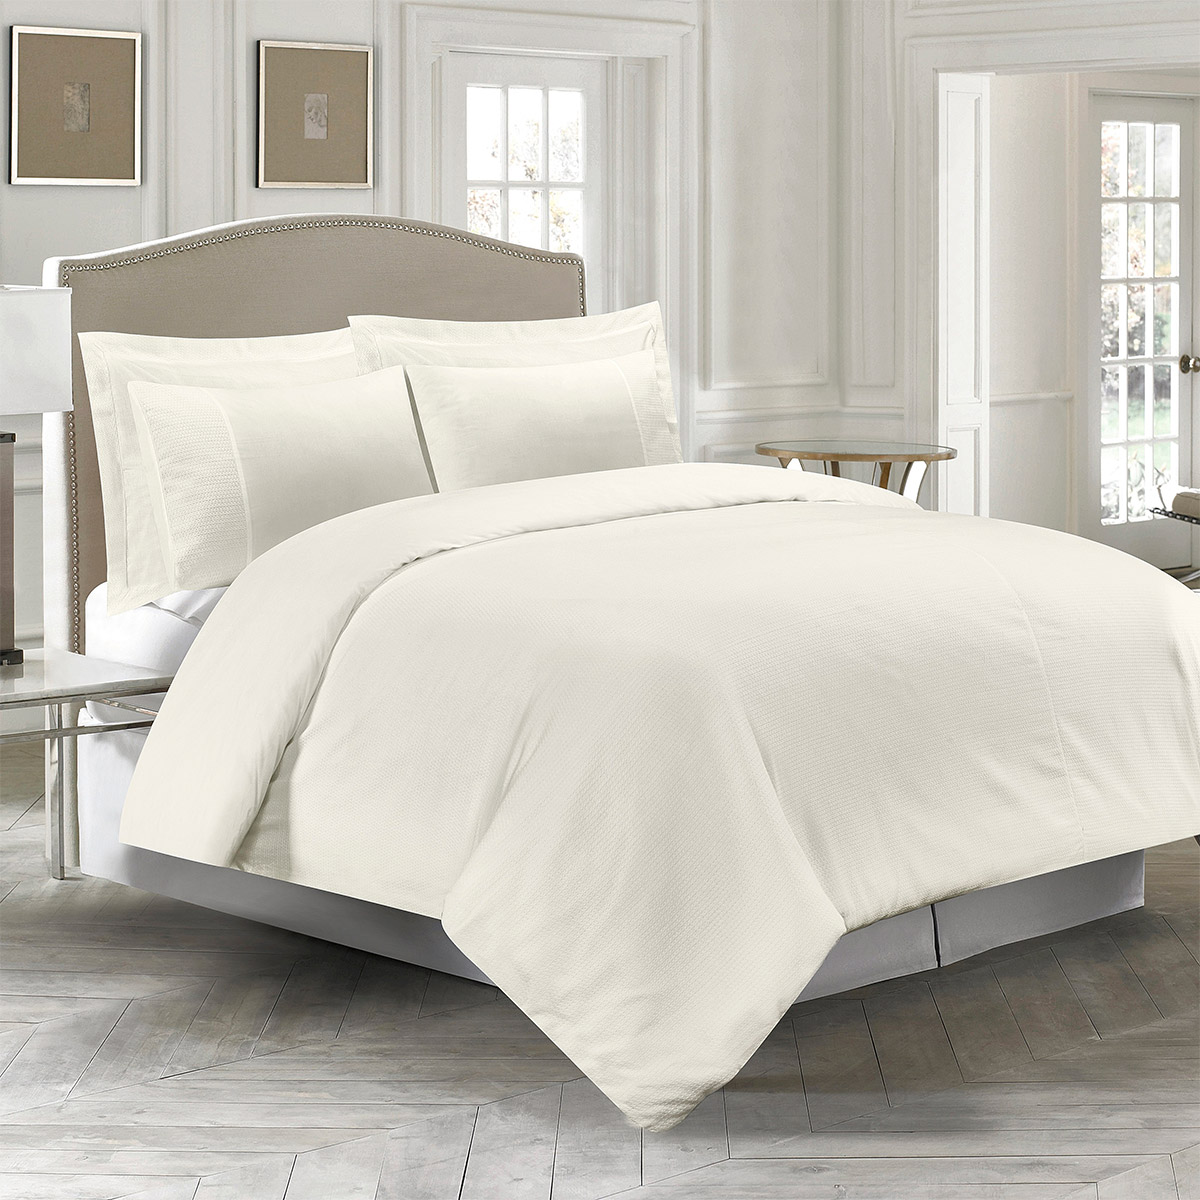 Dunnes Stores Ivory Textured Duvet Cover